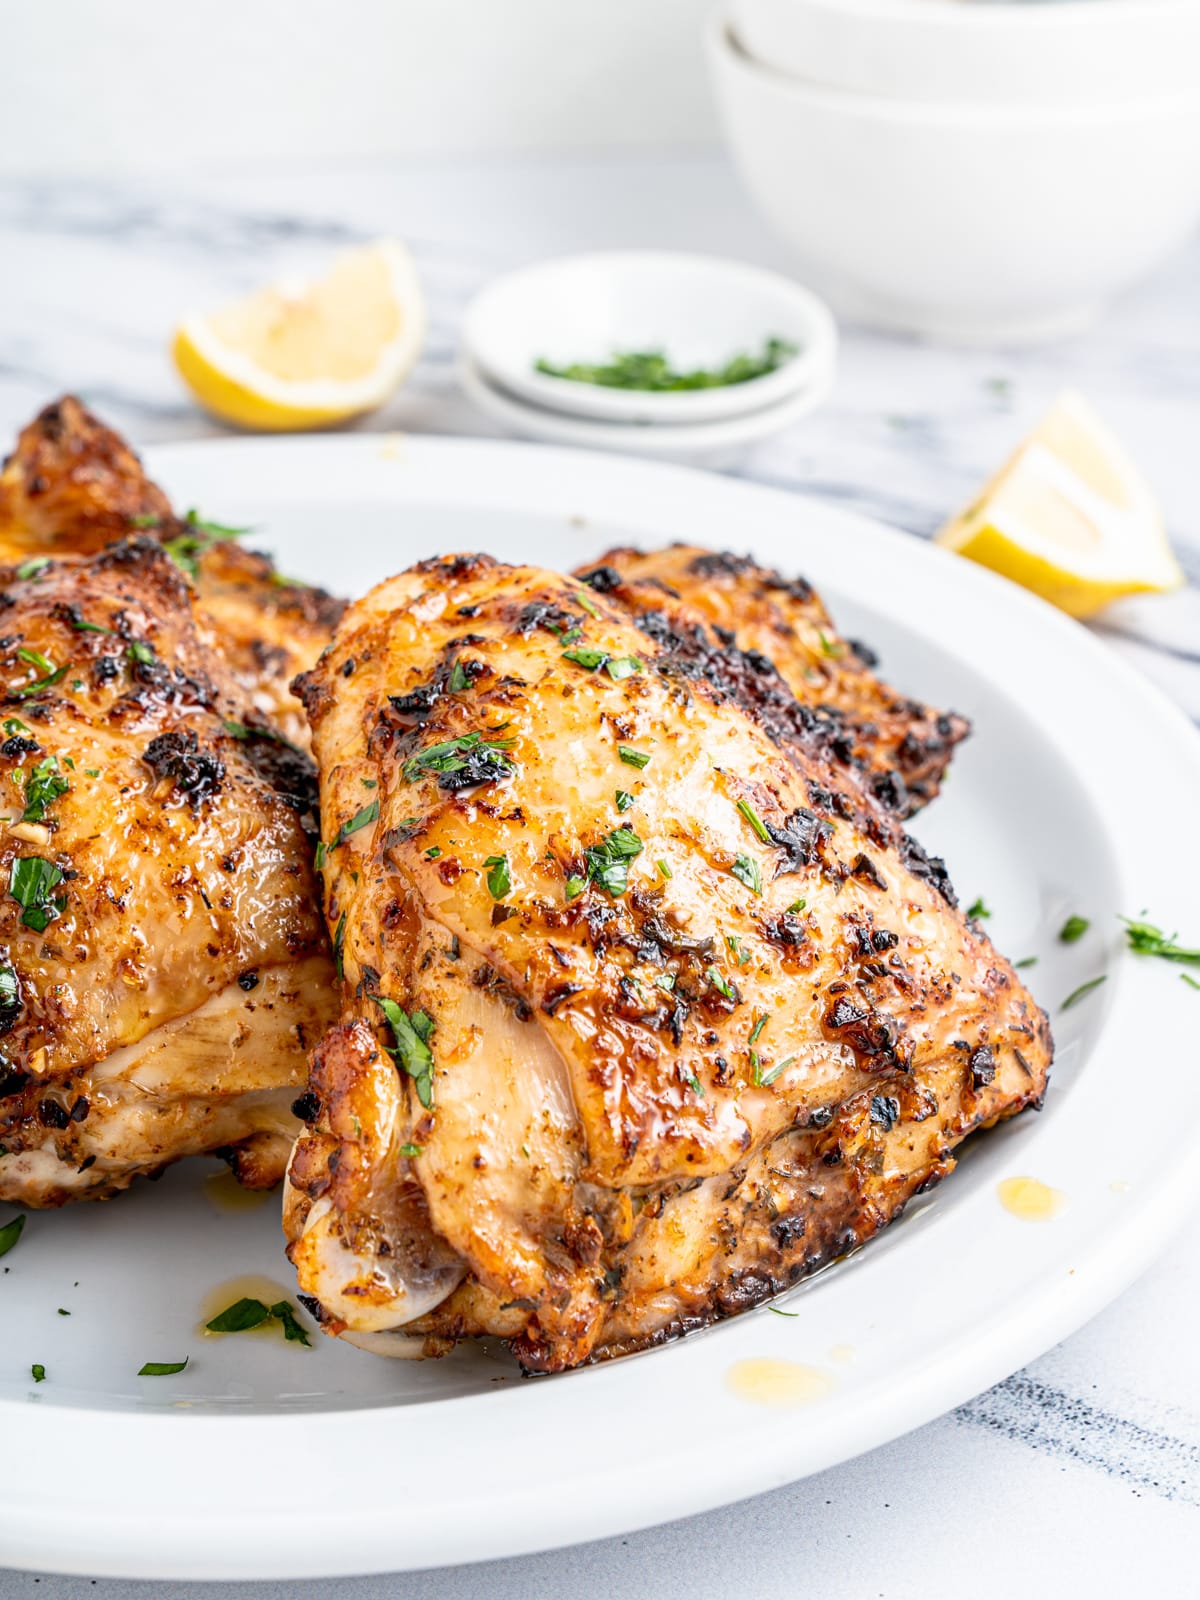 garnish chicken with herbs and lemon and serve